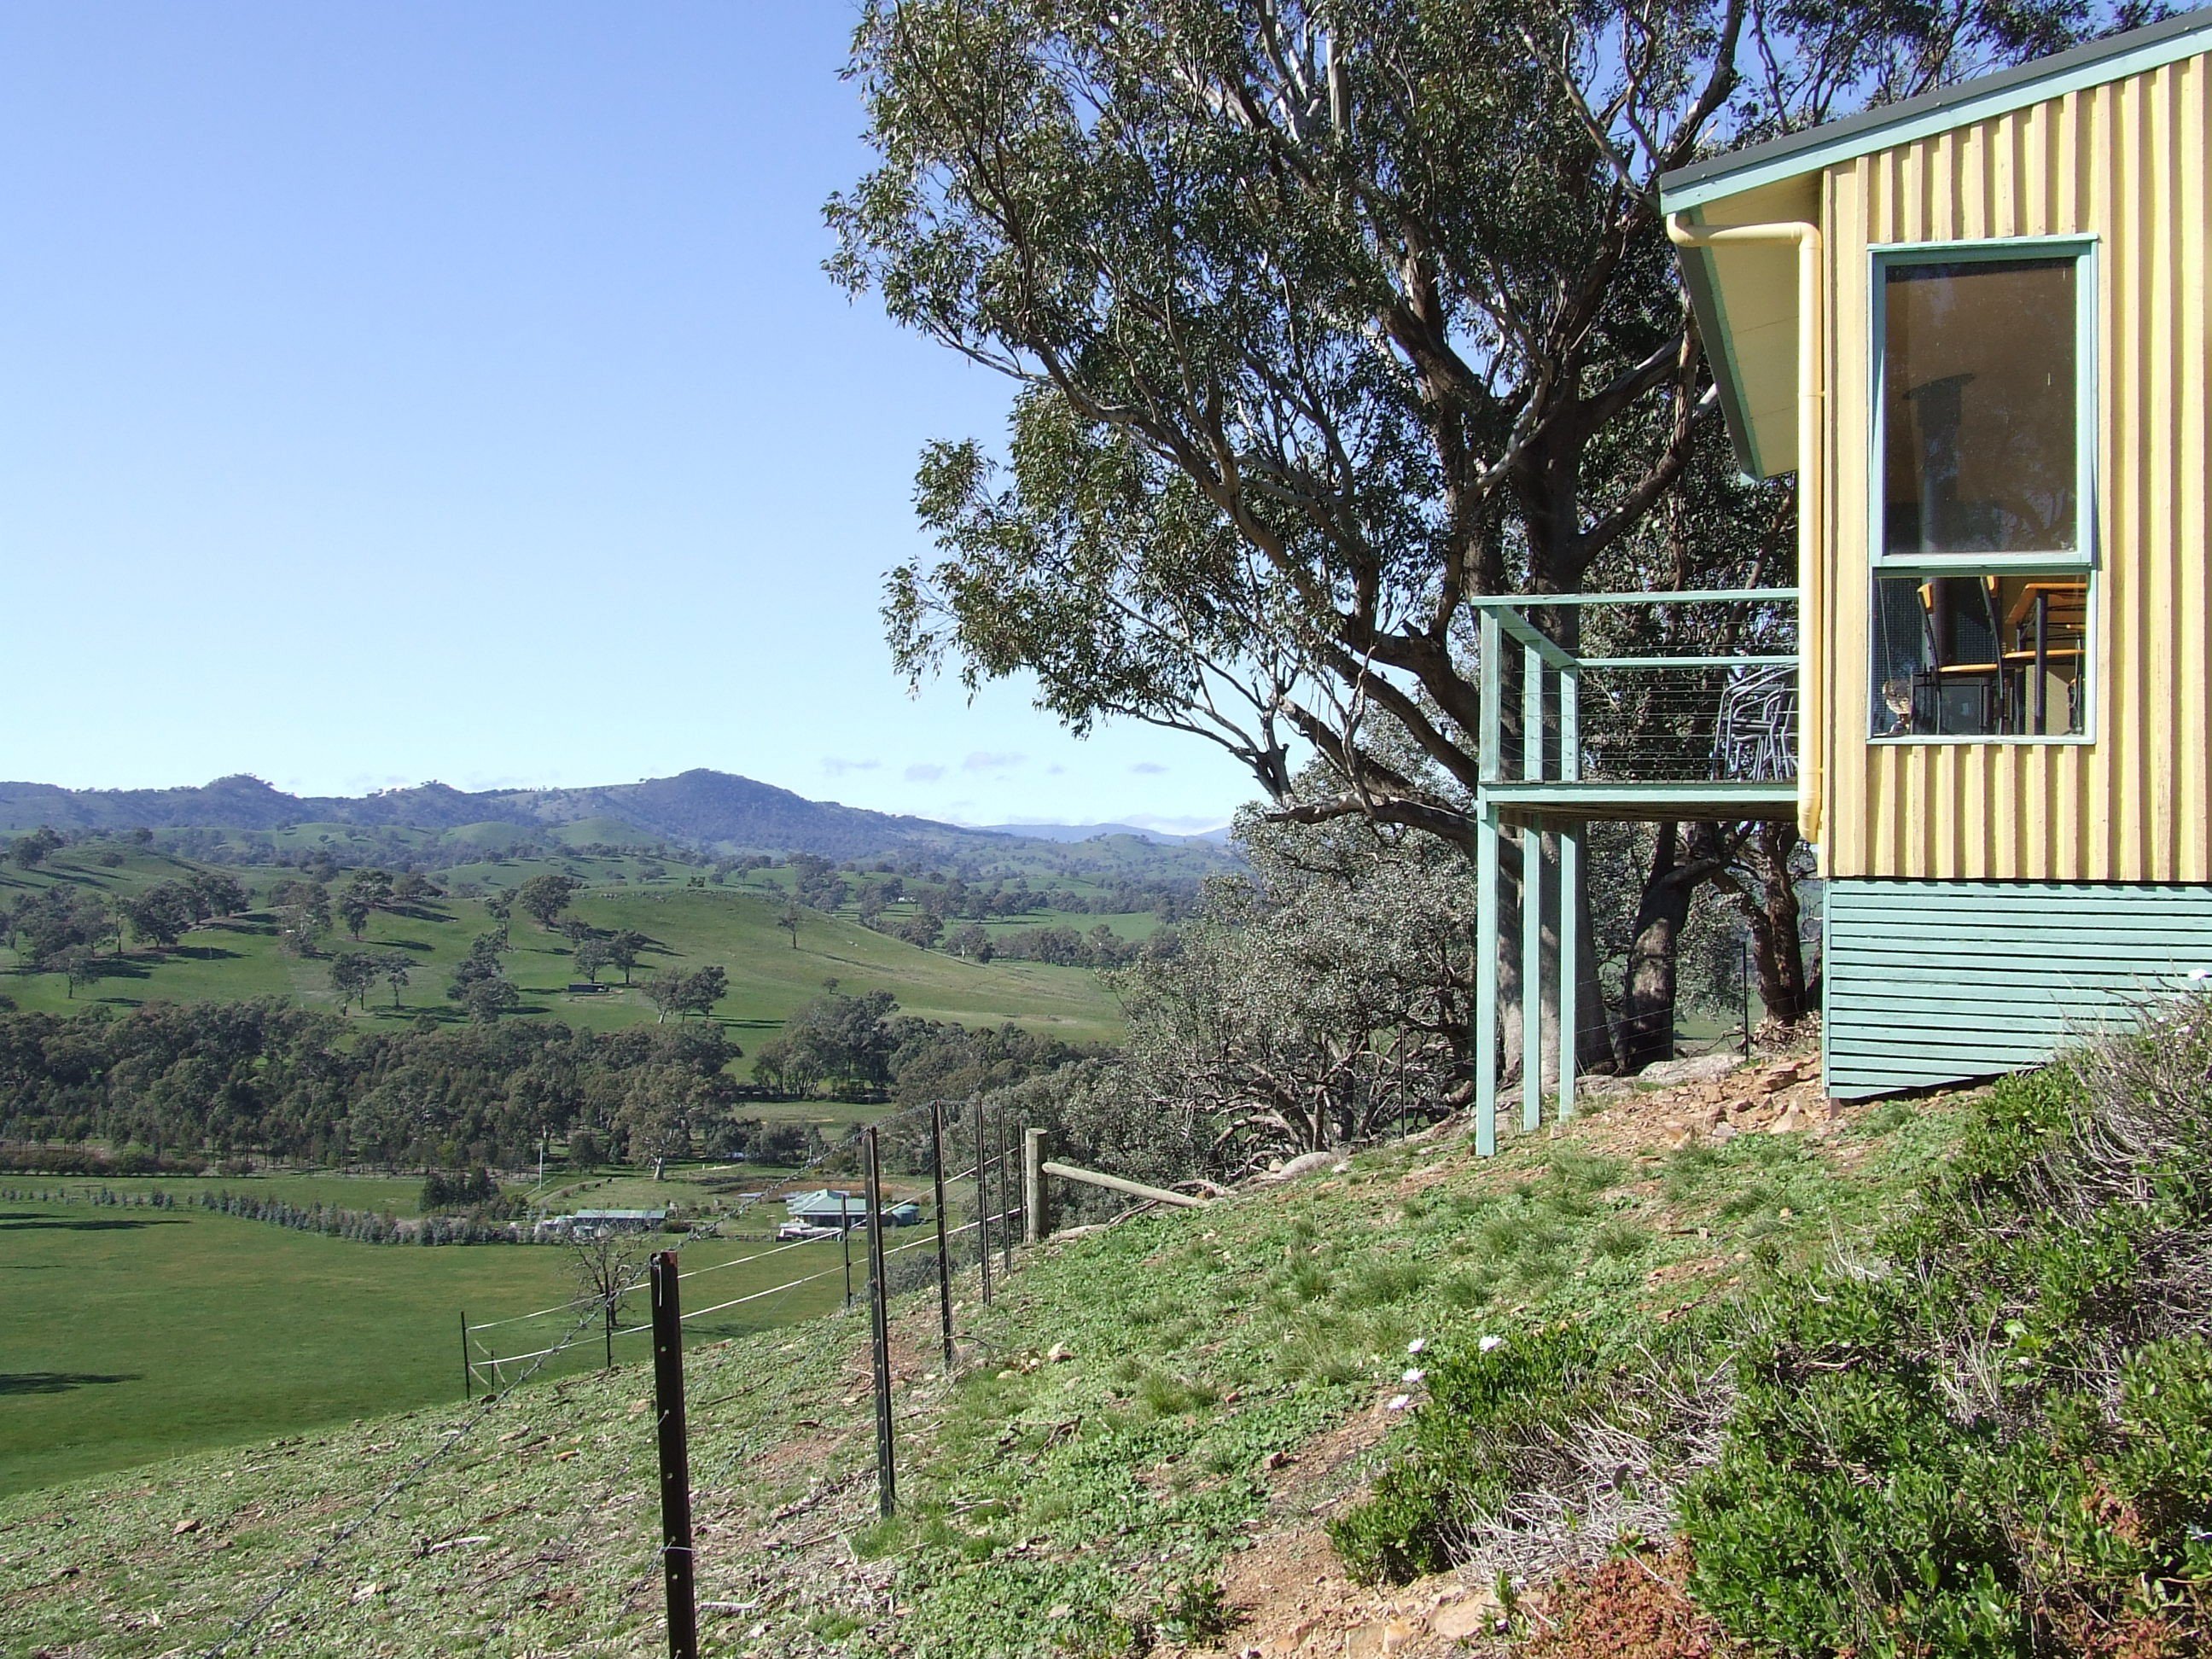 All our cottages have their very own private elevated balcony with spectacular views